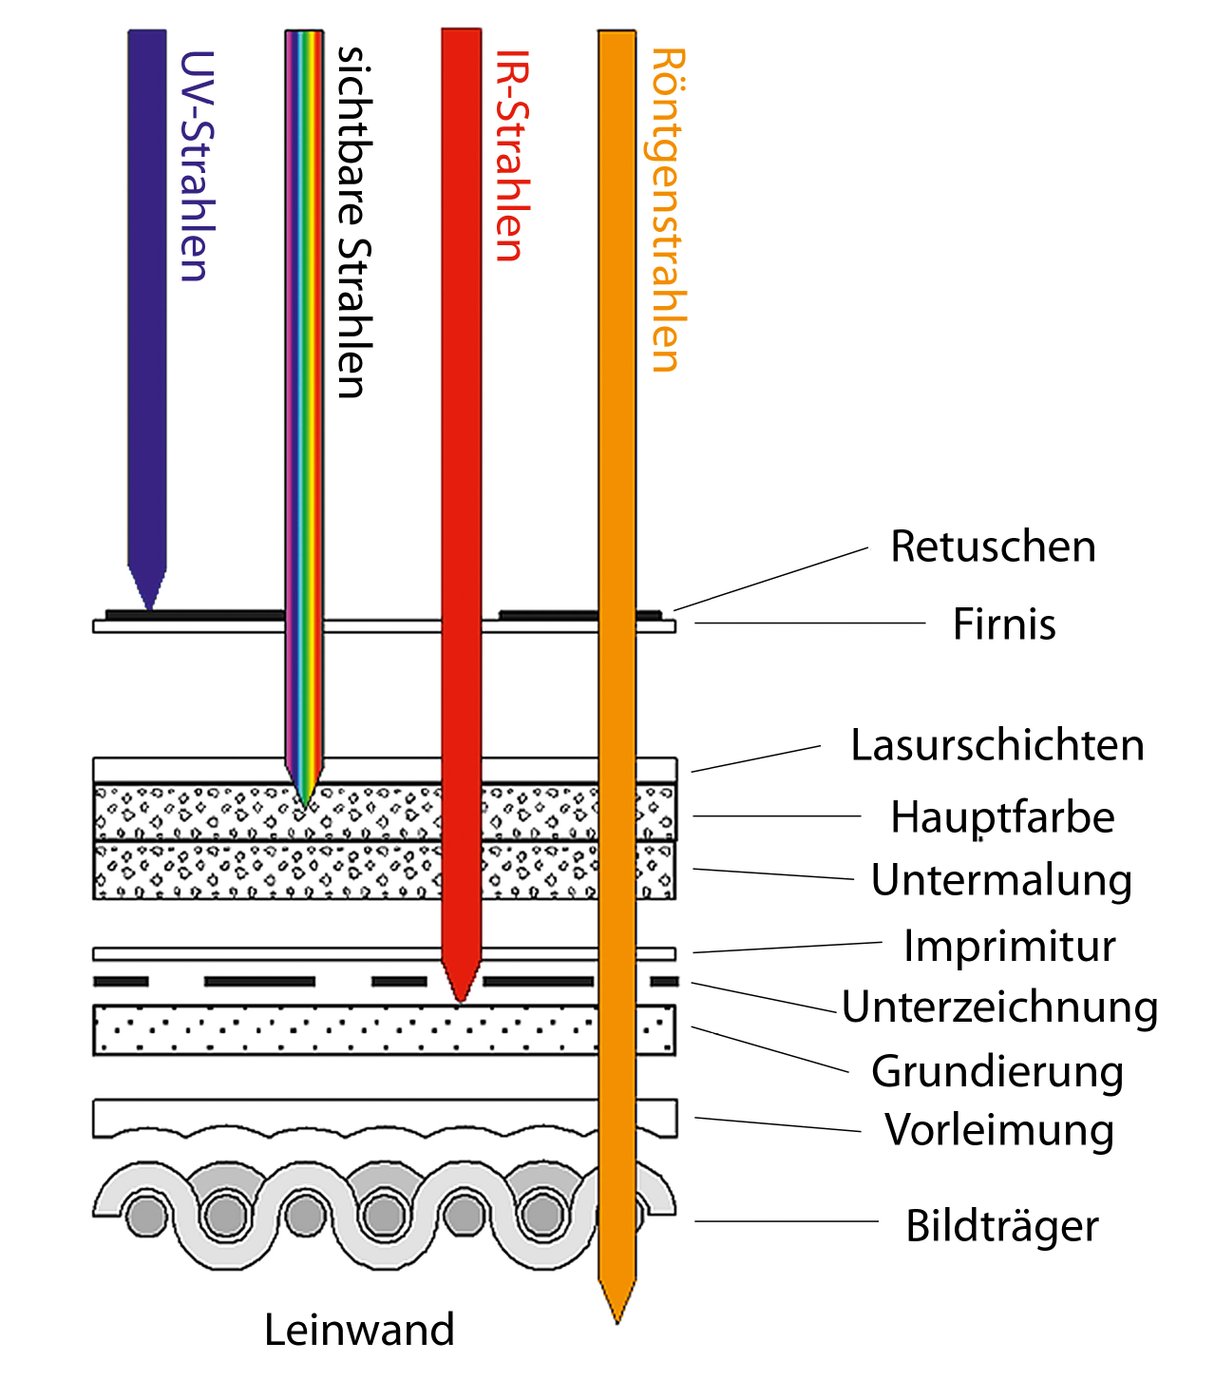 A diagram schematically depicts the structure of a painting layer, starting from the canvas, via pre-glue, undercoat, imprimitura, underpainting, main colour and glaze layer. Arrows coming from above go to different depths into these layers and show how different electromagnetic rays penetrate the painting layer (UV: up to the varnish, visible rays up to the glaze layers/main colour, IR rays up to the imprint/underdrawing, X-rays up to the canvas).